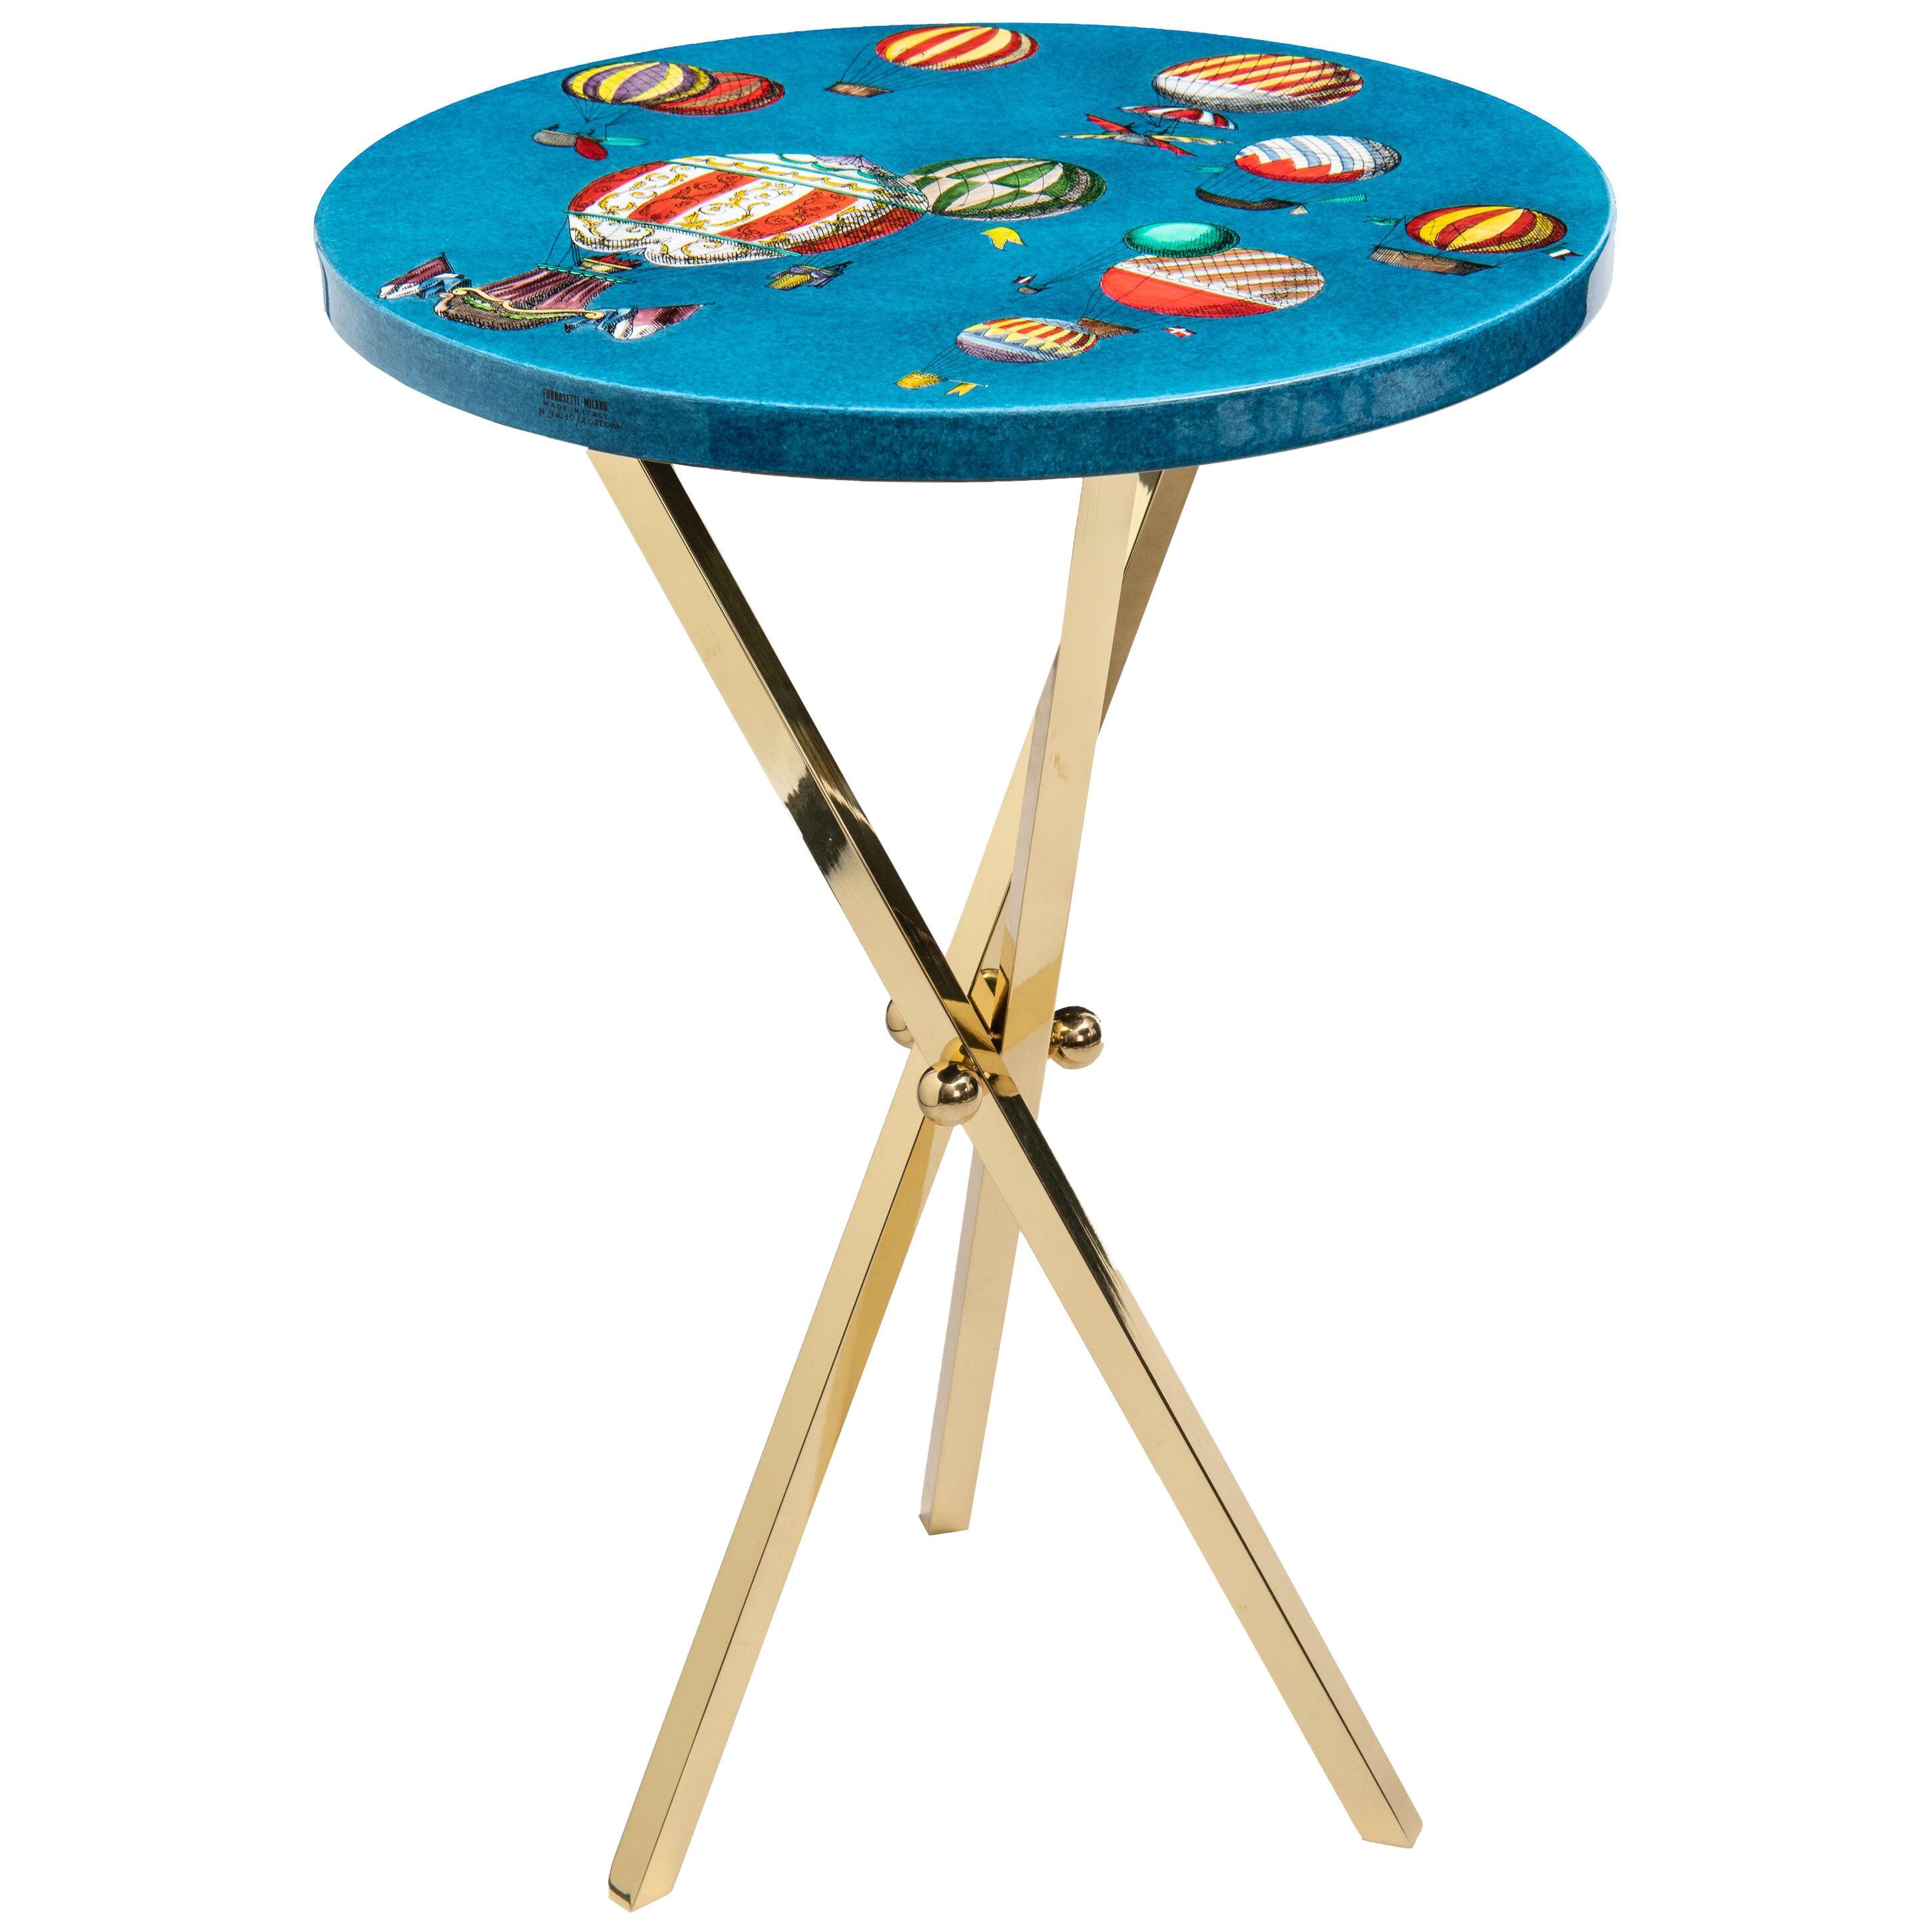 Occasional Table "Palloni " by Barnaba Fornasetti, Italy 2019